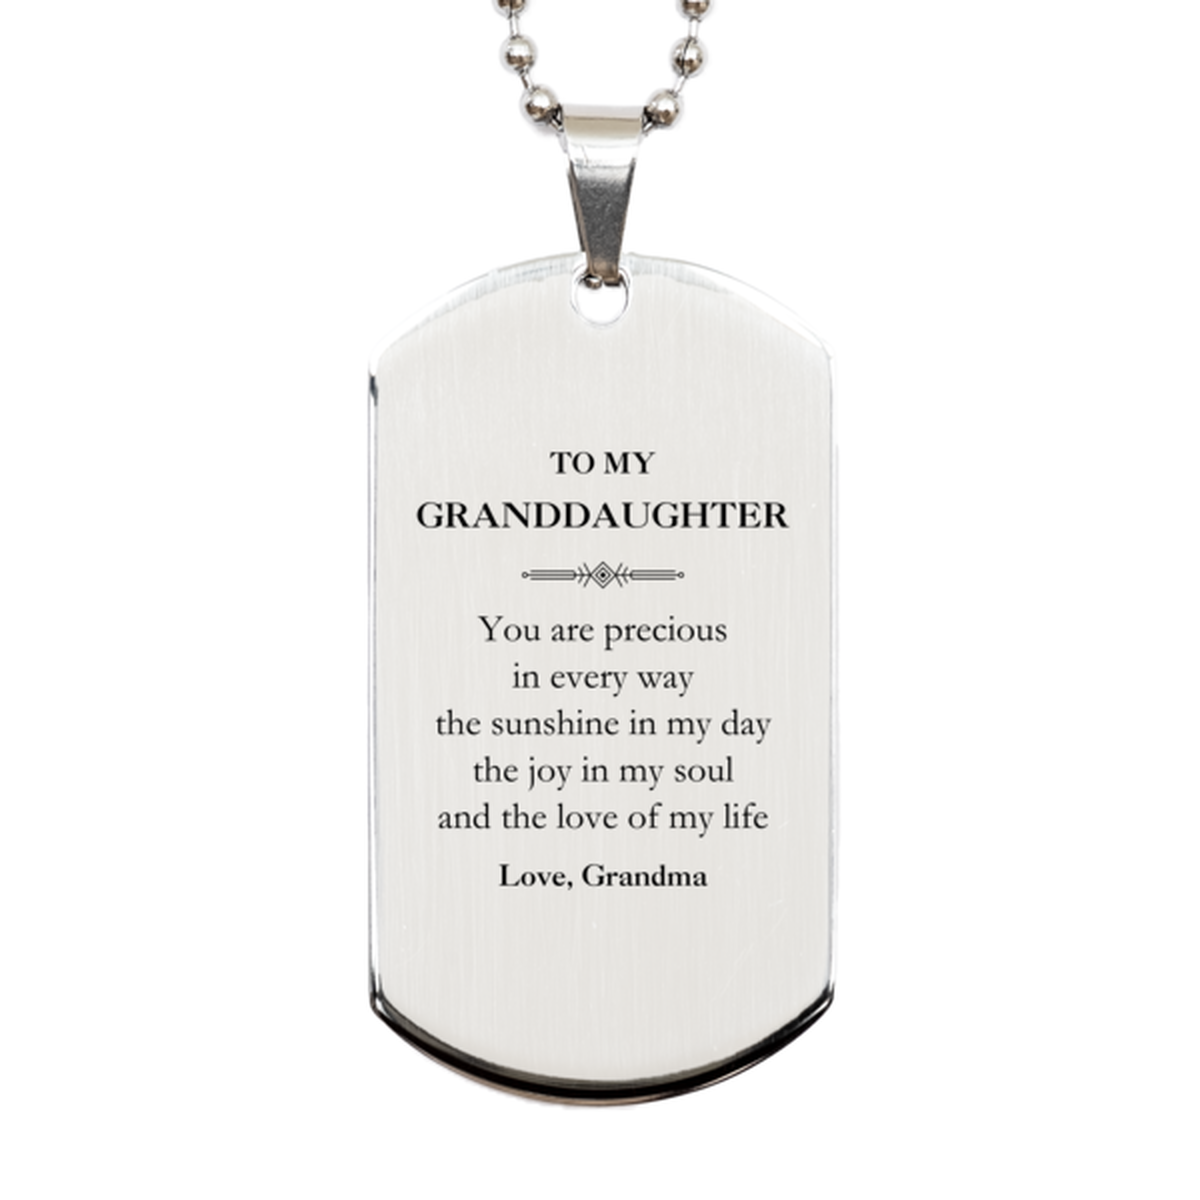 Graduation Gifts for Granddaughter Silver Dog Tag Present from Grandma, Christmas Granddaughter Birthday Gifts Granddaughter You are precious in every way the sunshine in my day. Love, Grandma